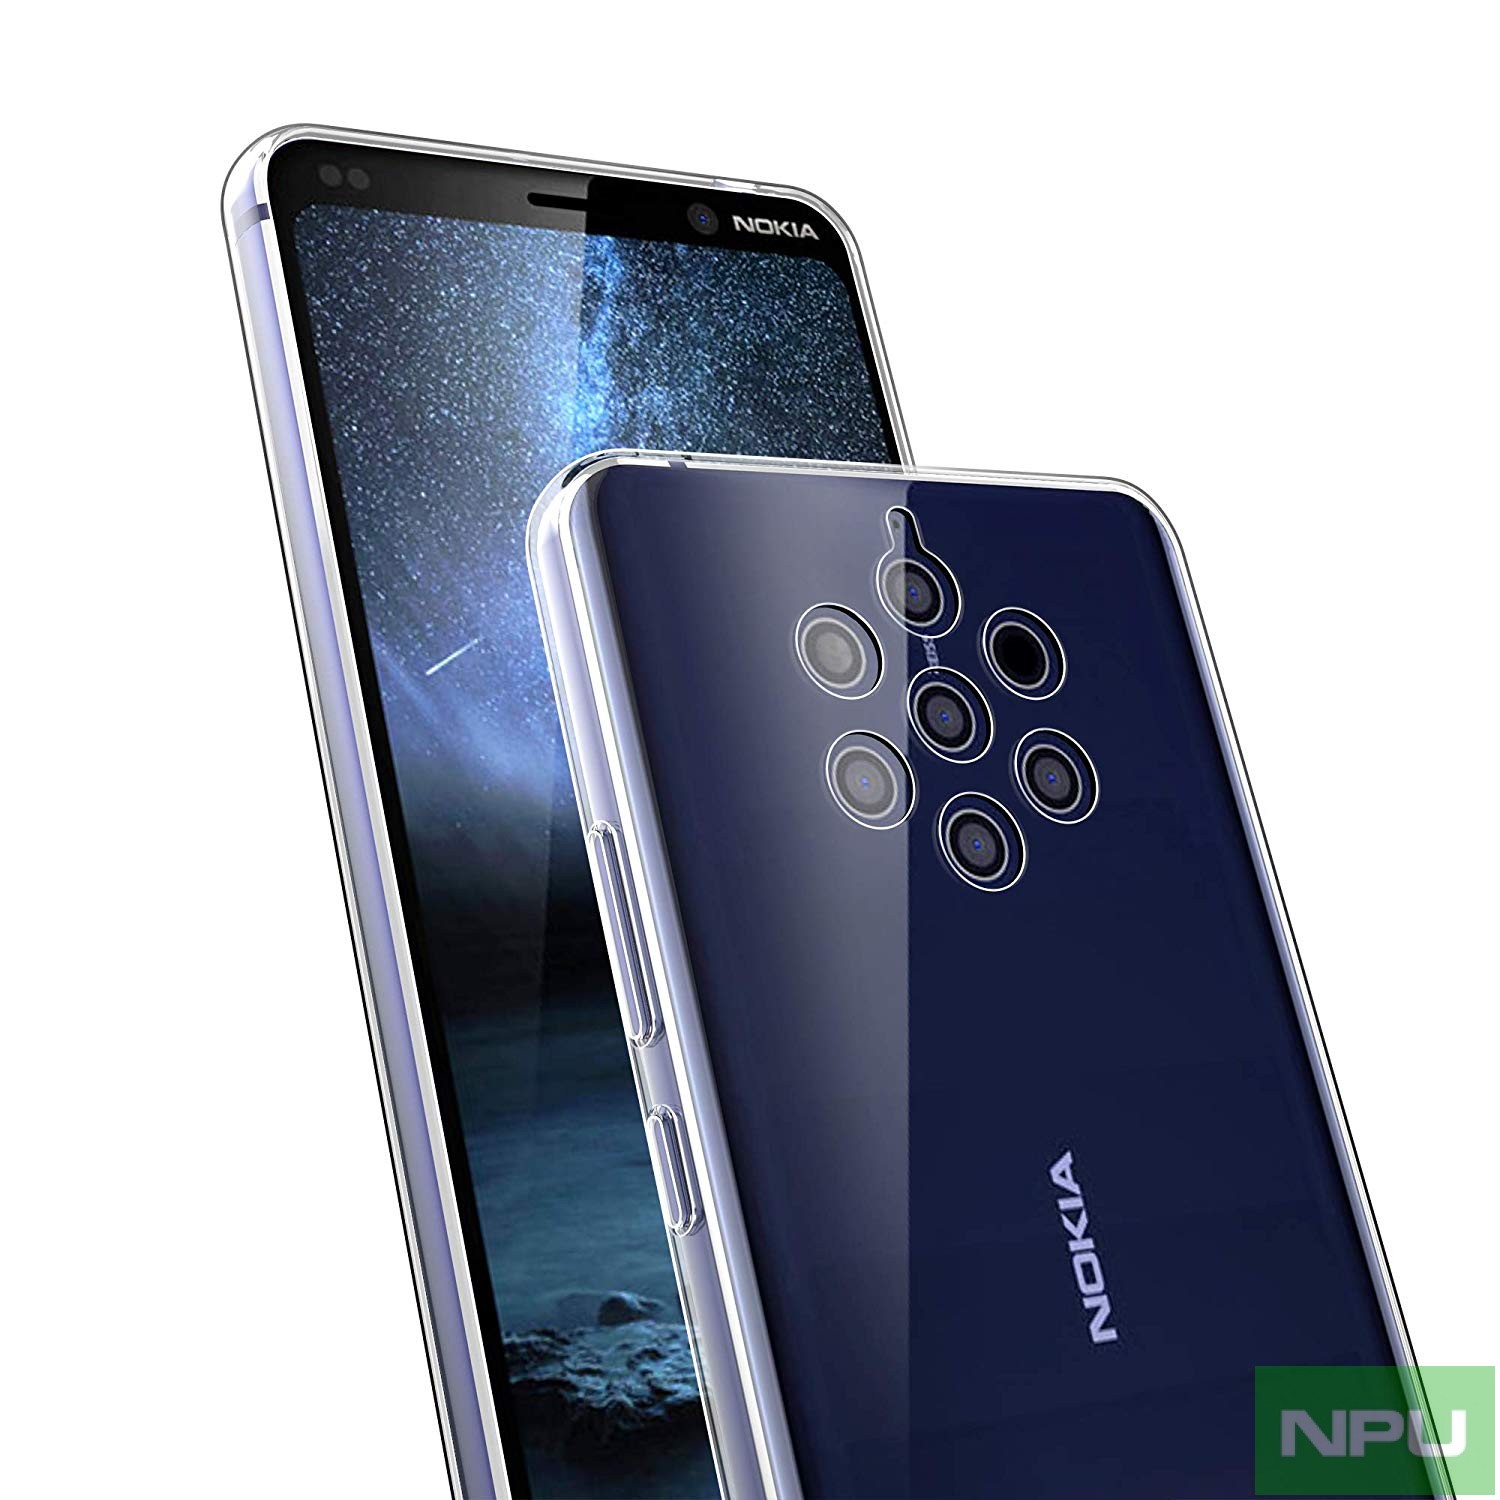 Nokia 9 Pureview Display Size Confirmed Size Compared Against